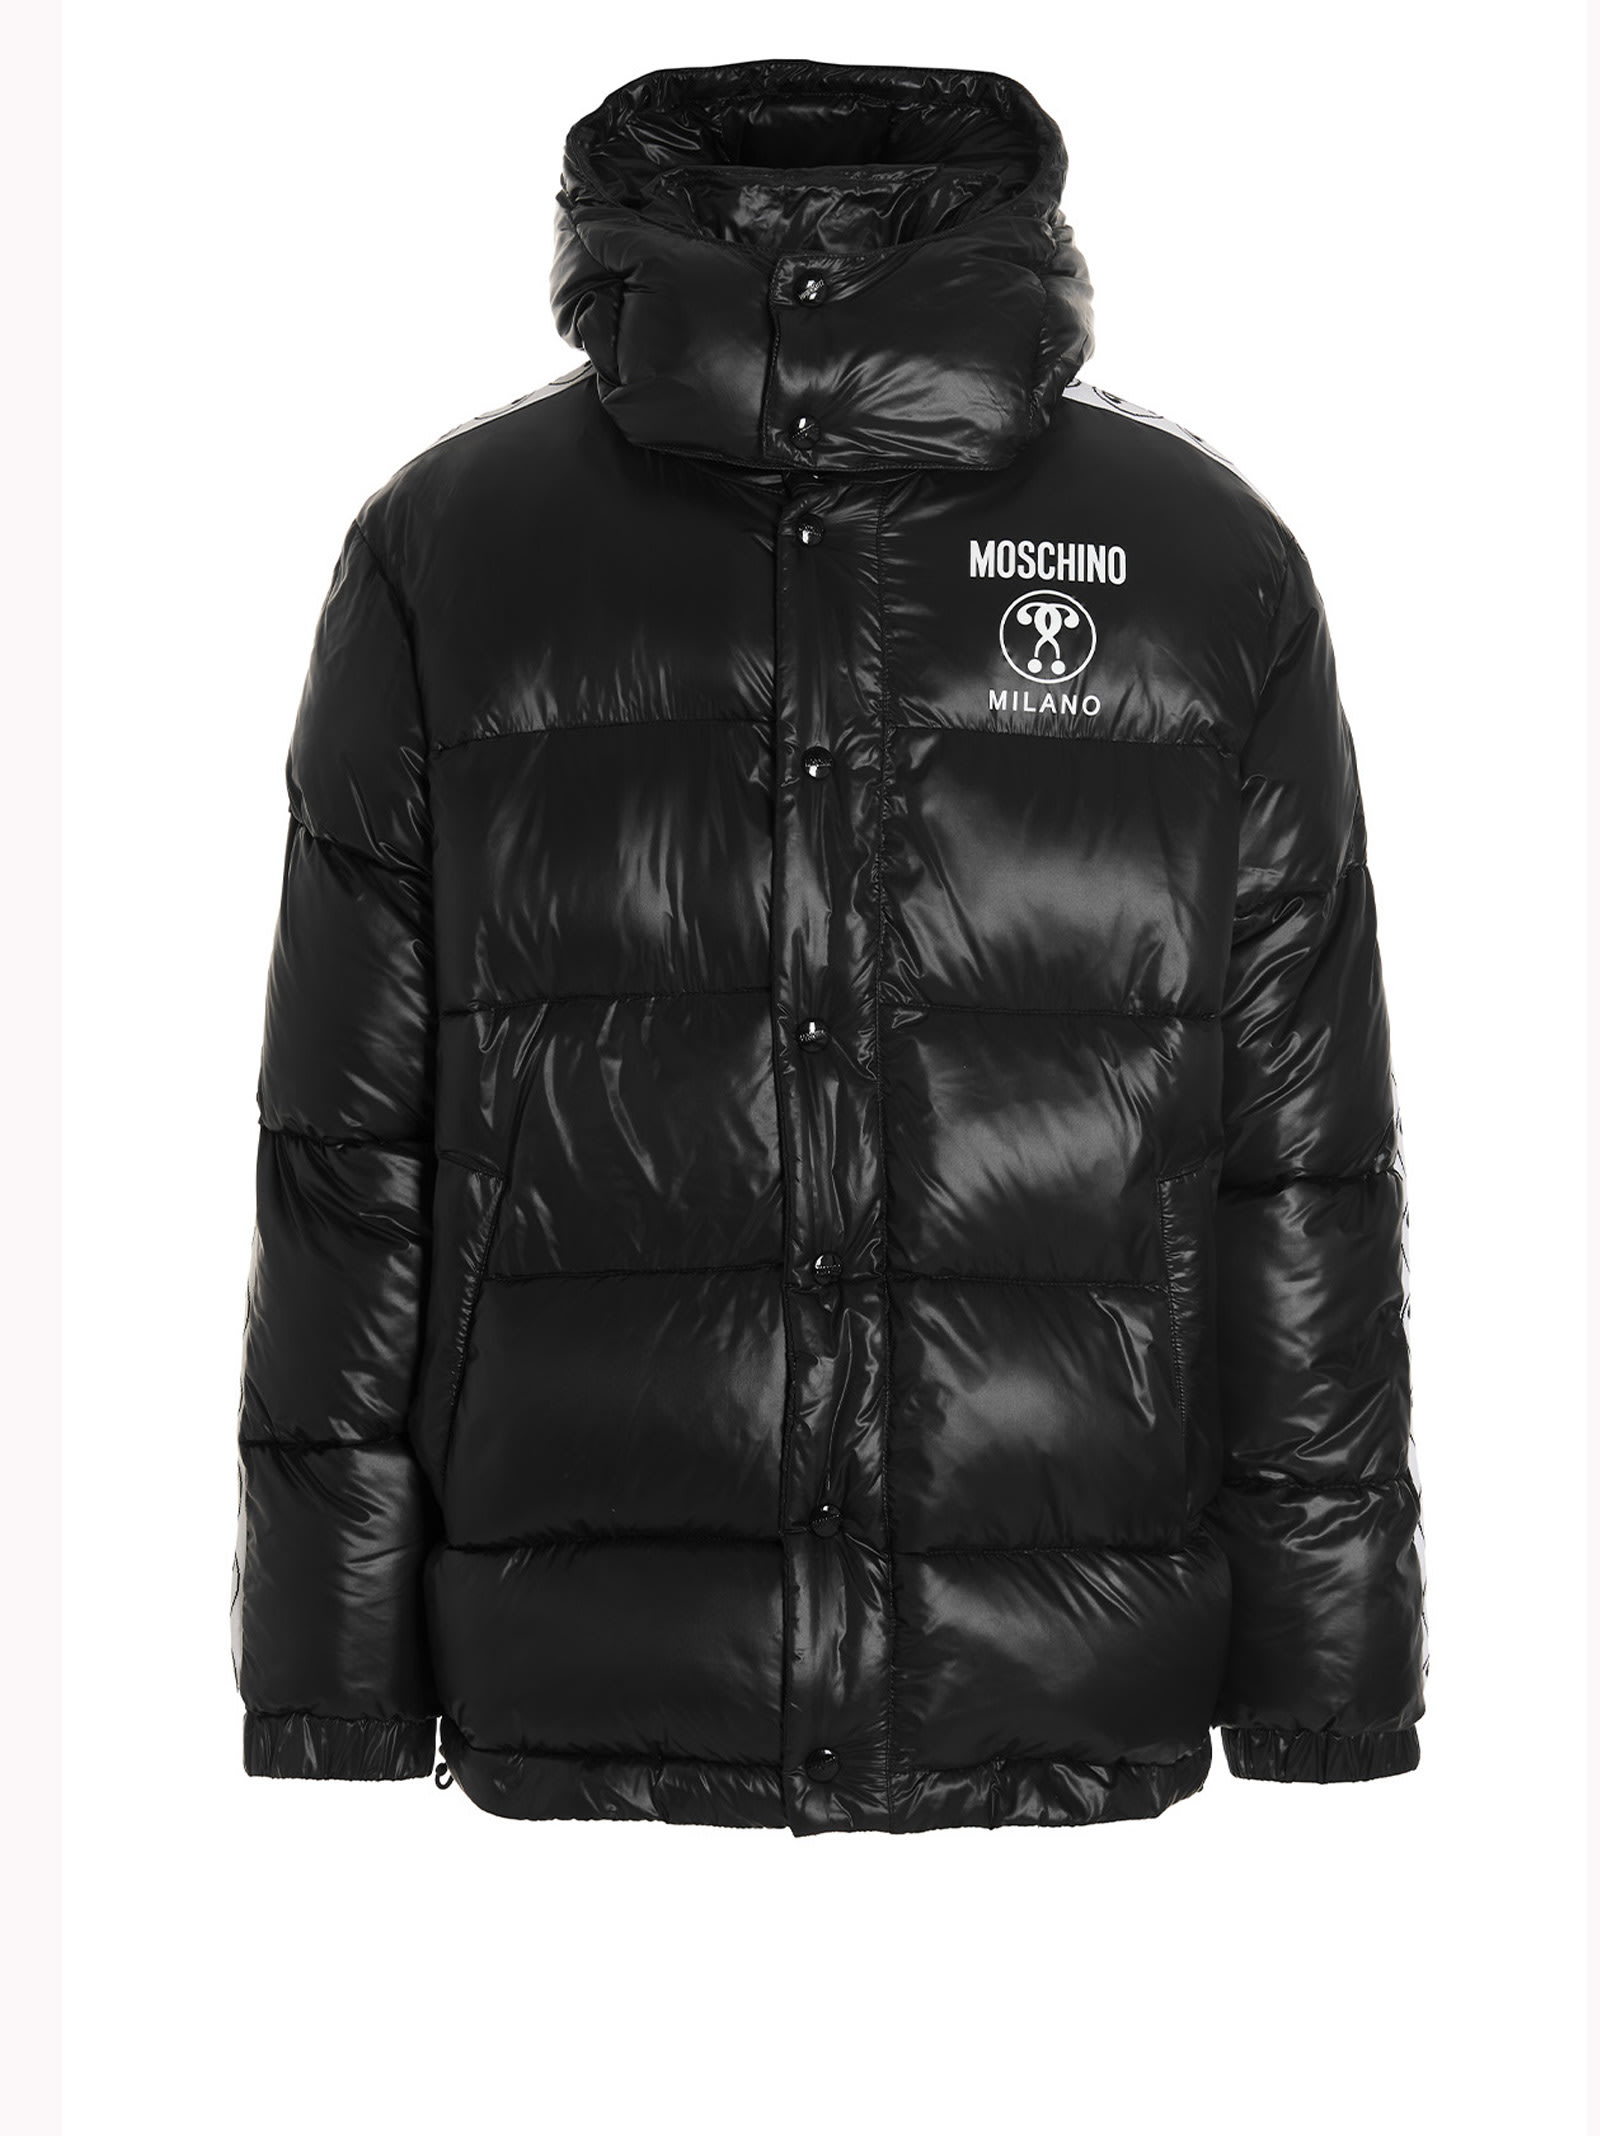 Moschino double Question Mark Down Jacket